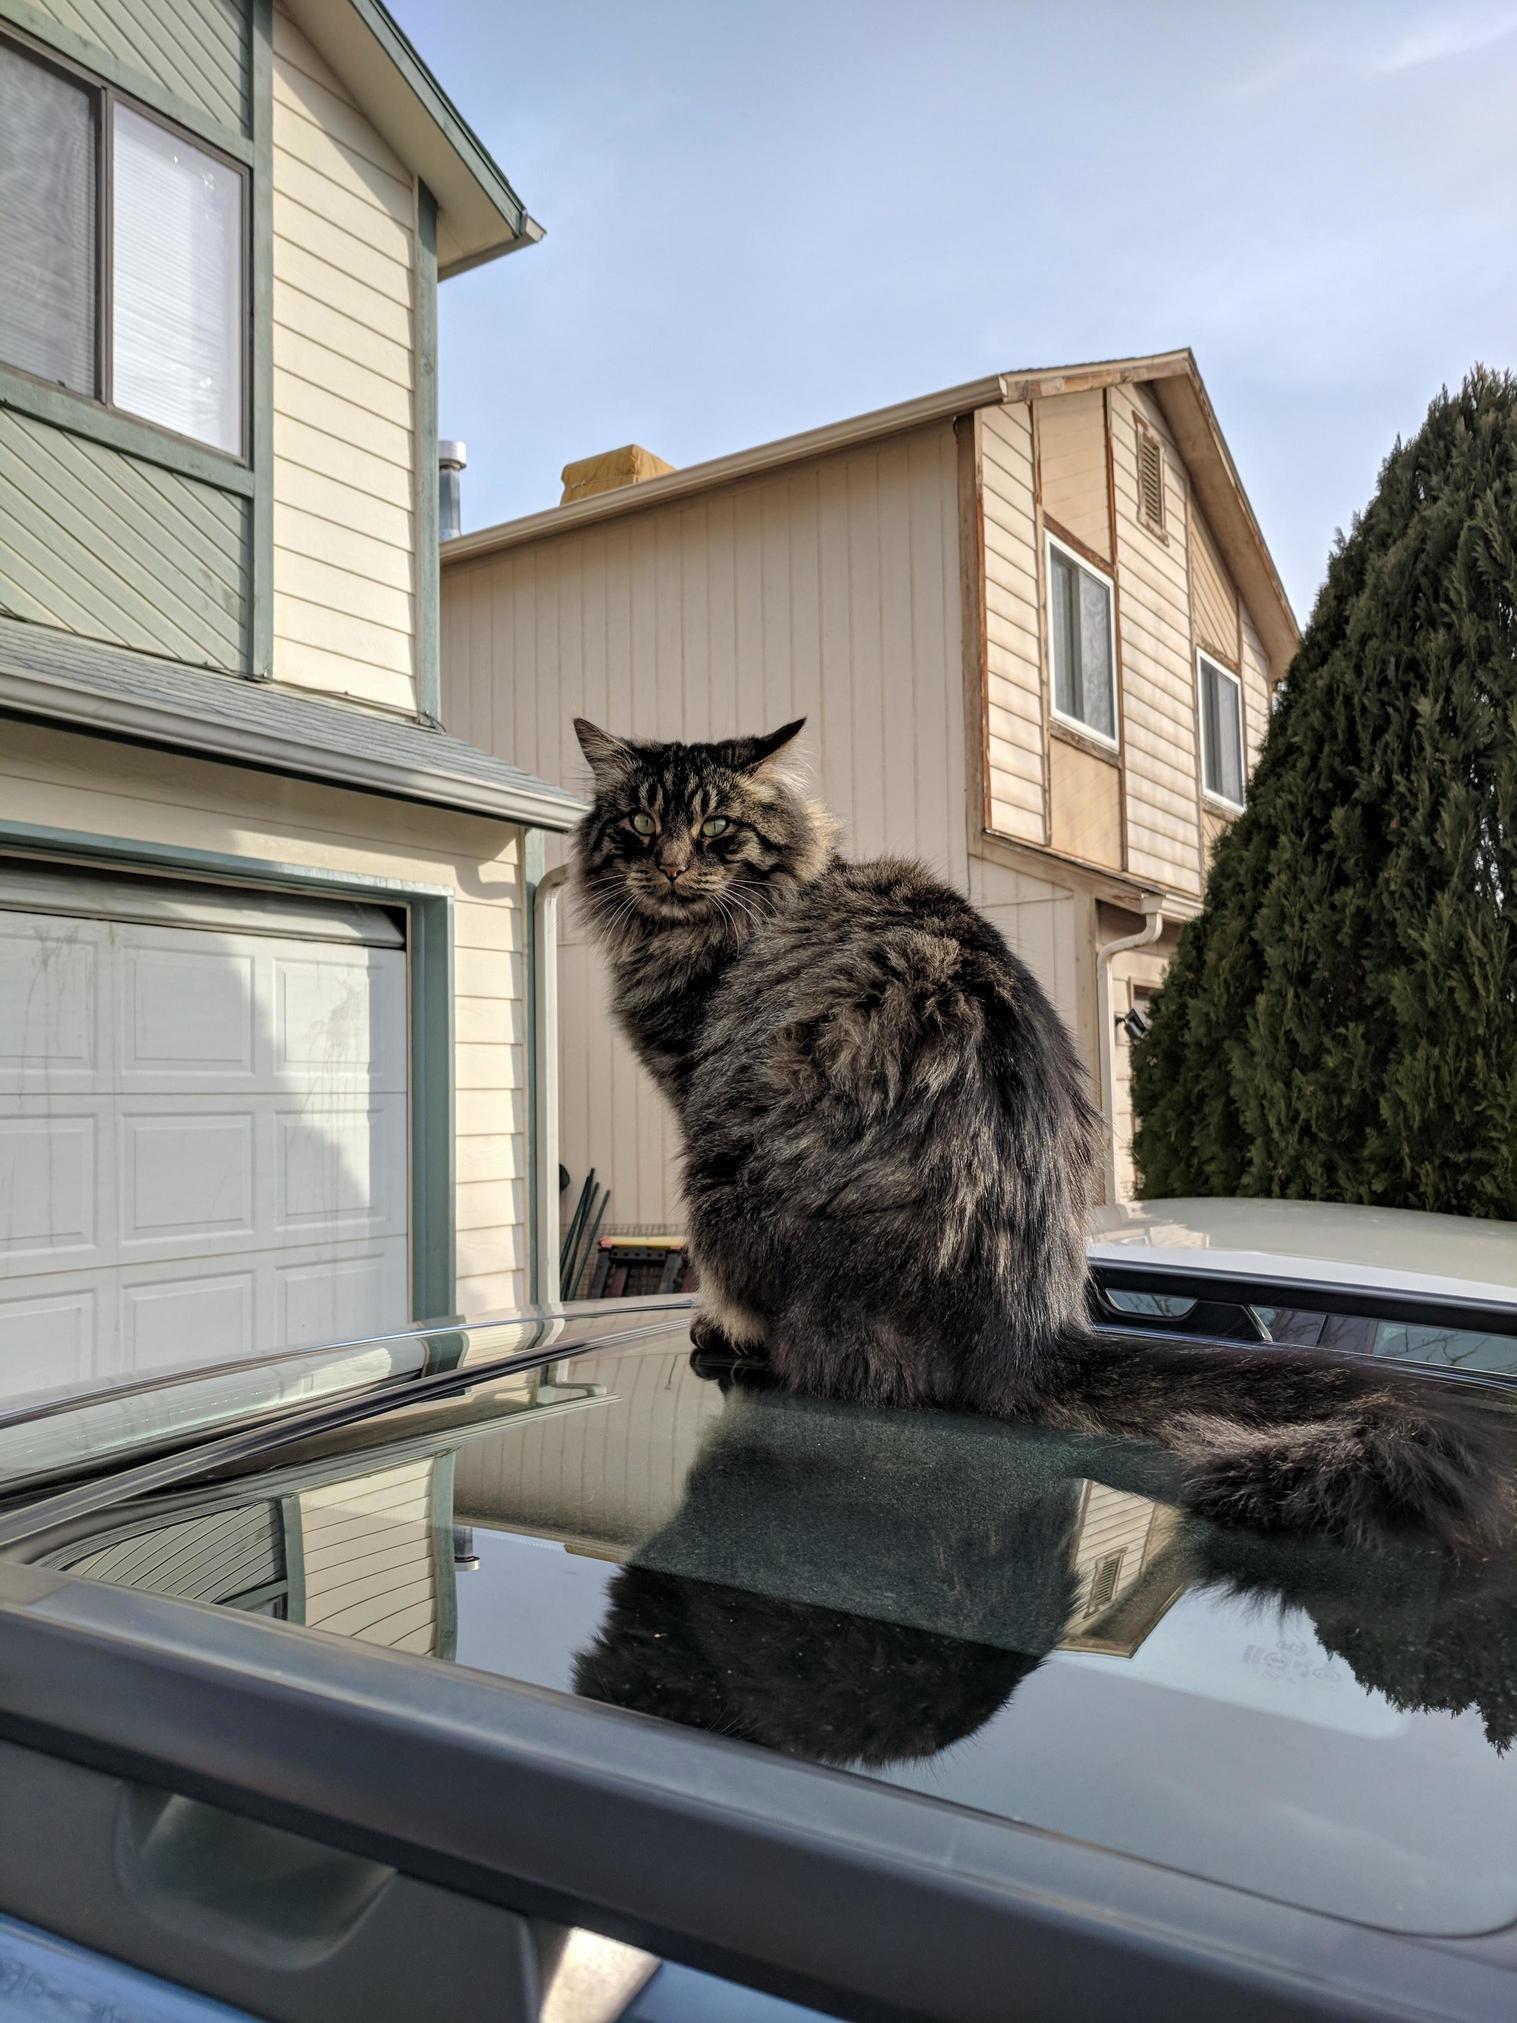 Dude loves putting paw prints on my freshly washed car.